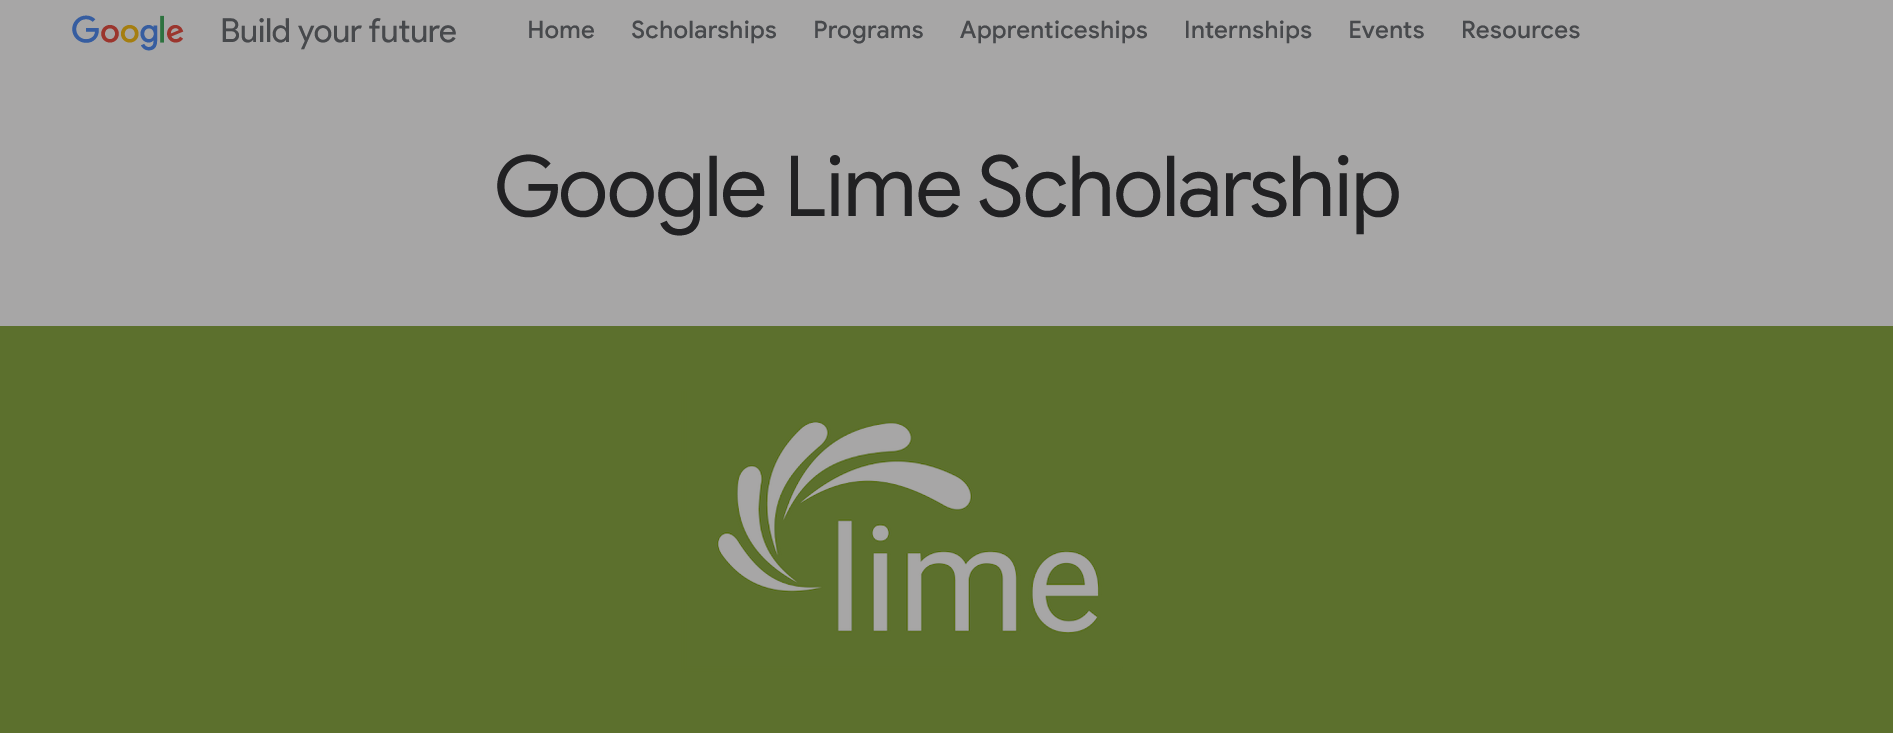 Google Lime Scholarship 2024 for Studies in USA and Canada